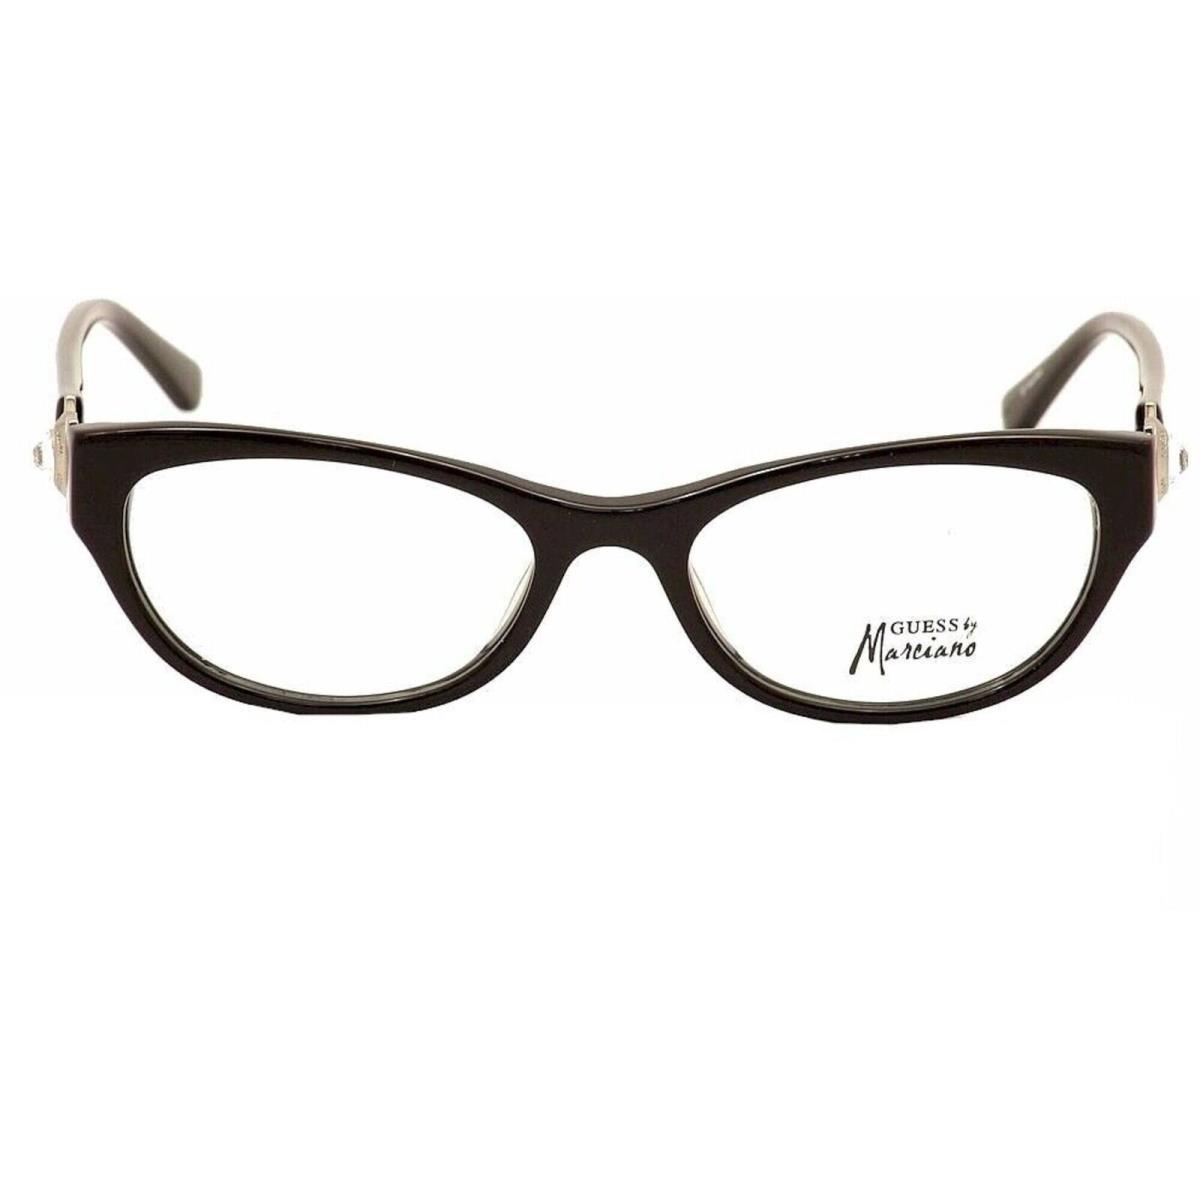 Guess By Marciano Women`s Eyeglasses Black Rectangular Frame GM0196 0196 Blk